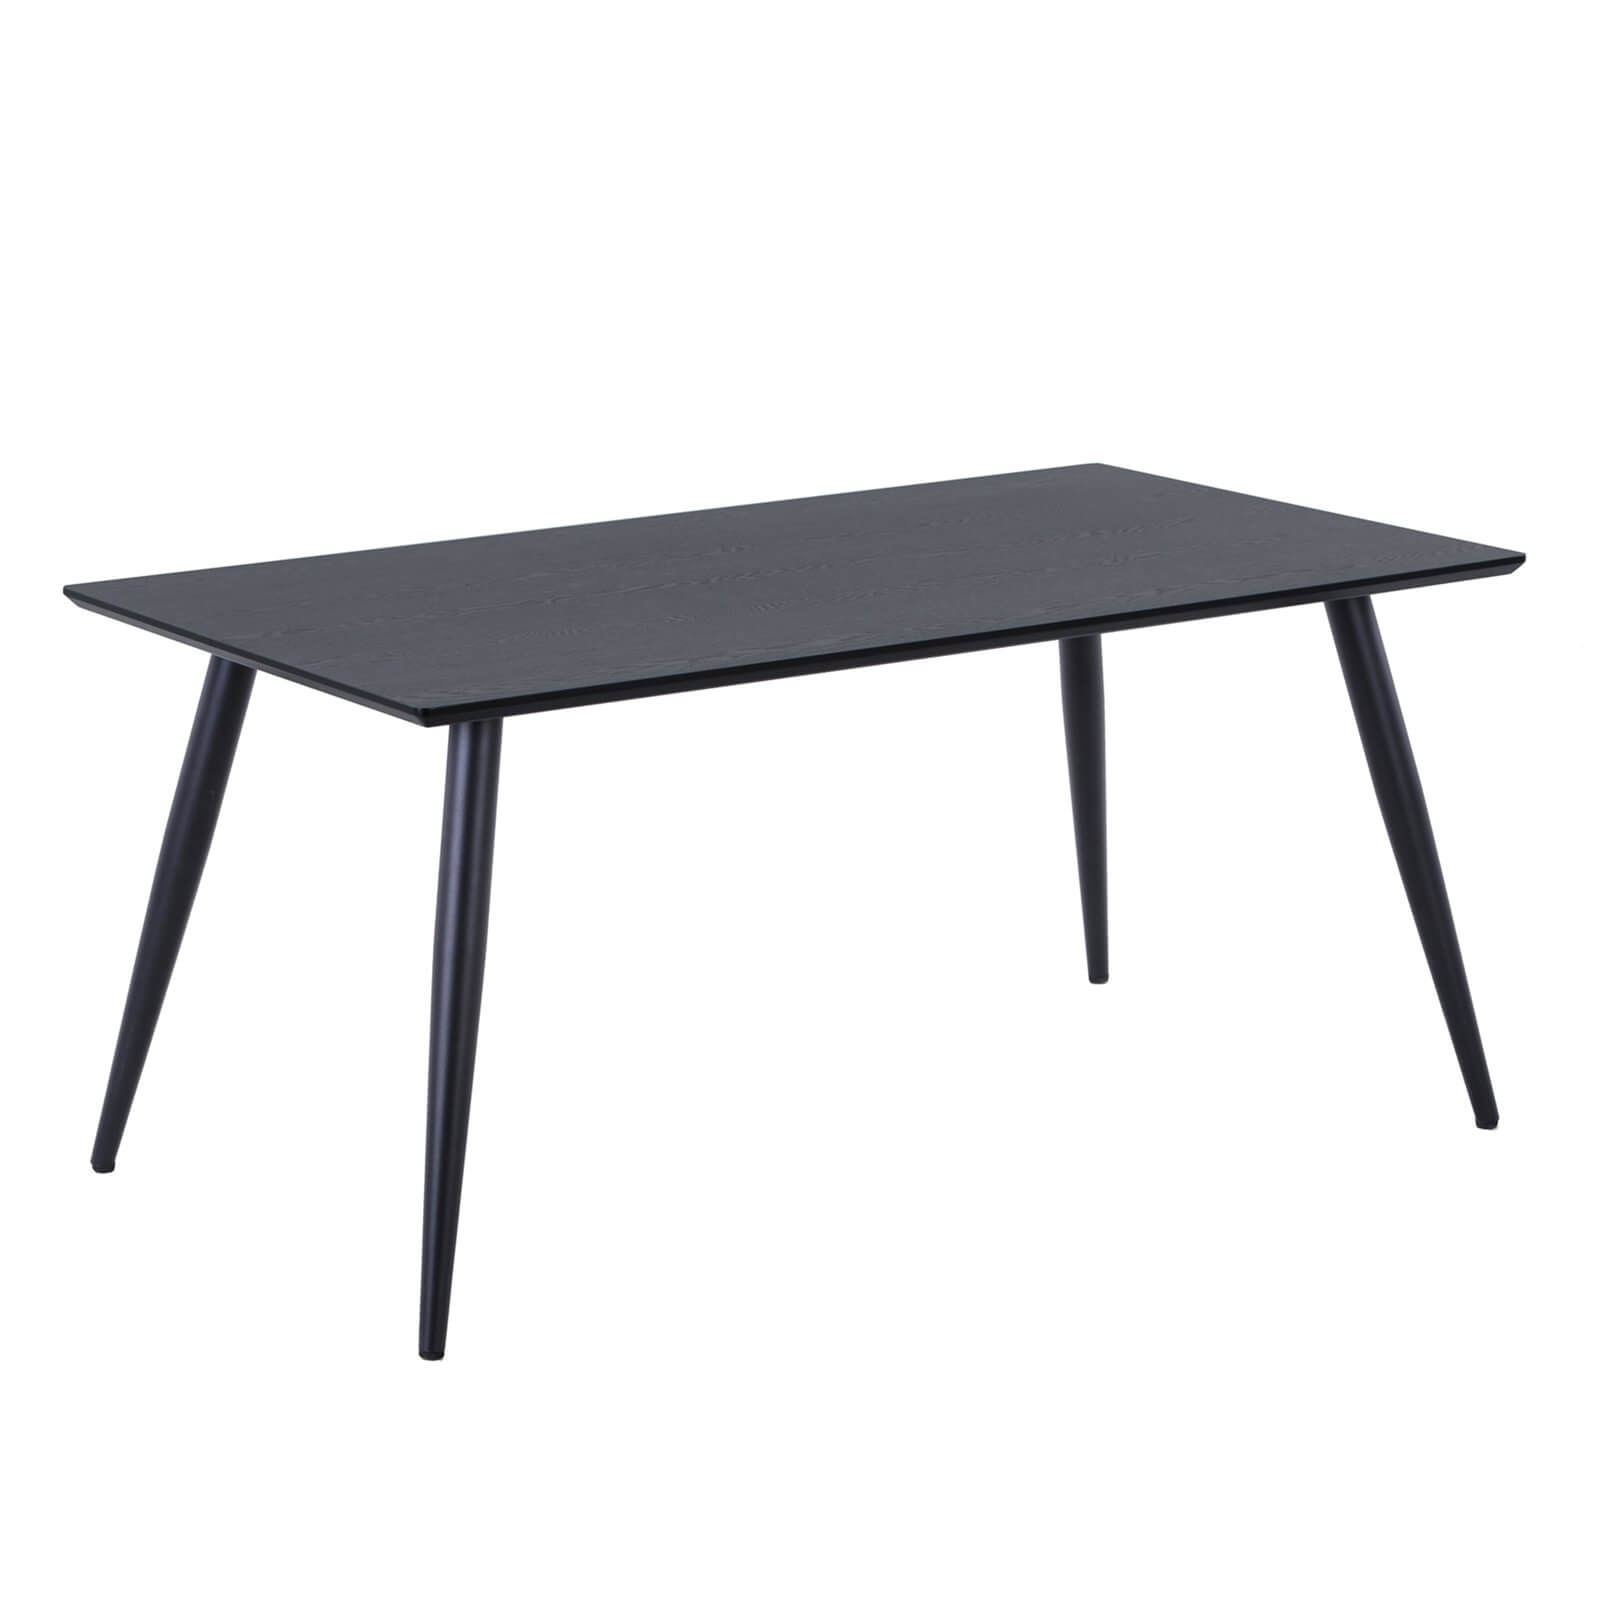 Illona Dining Table and 4 Chairs - Grey